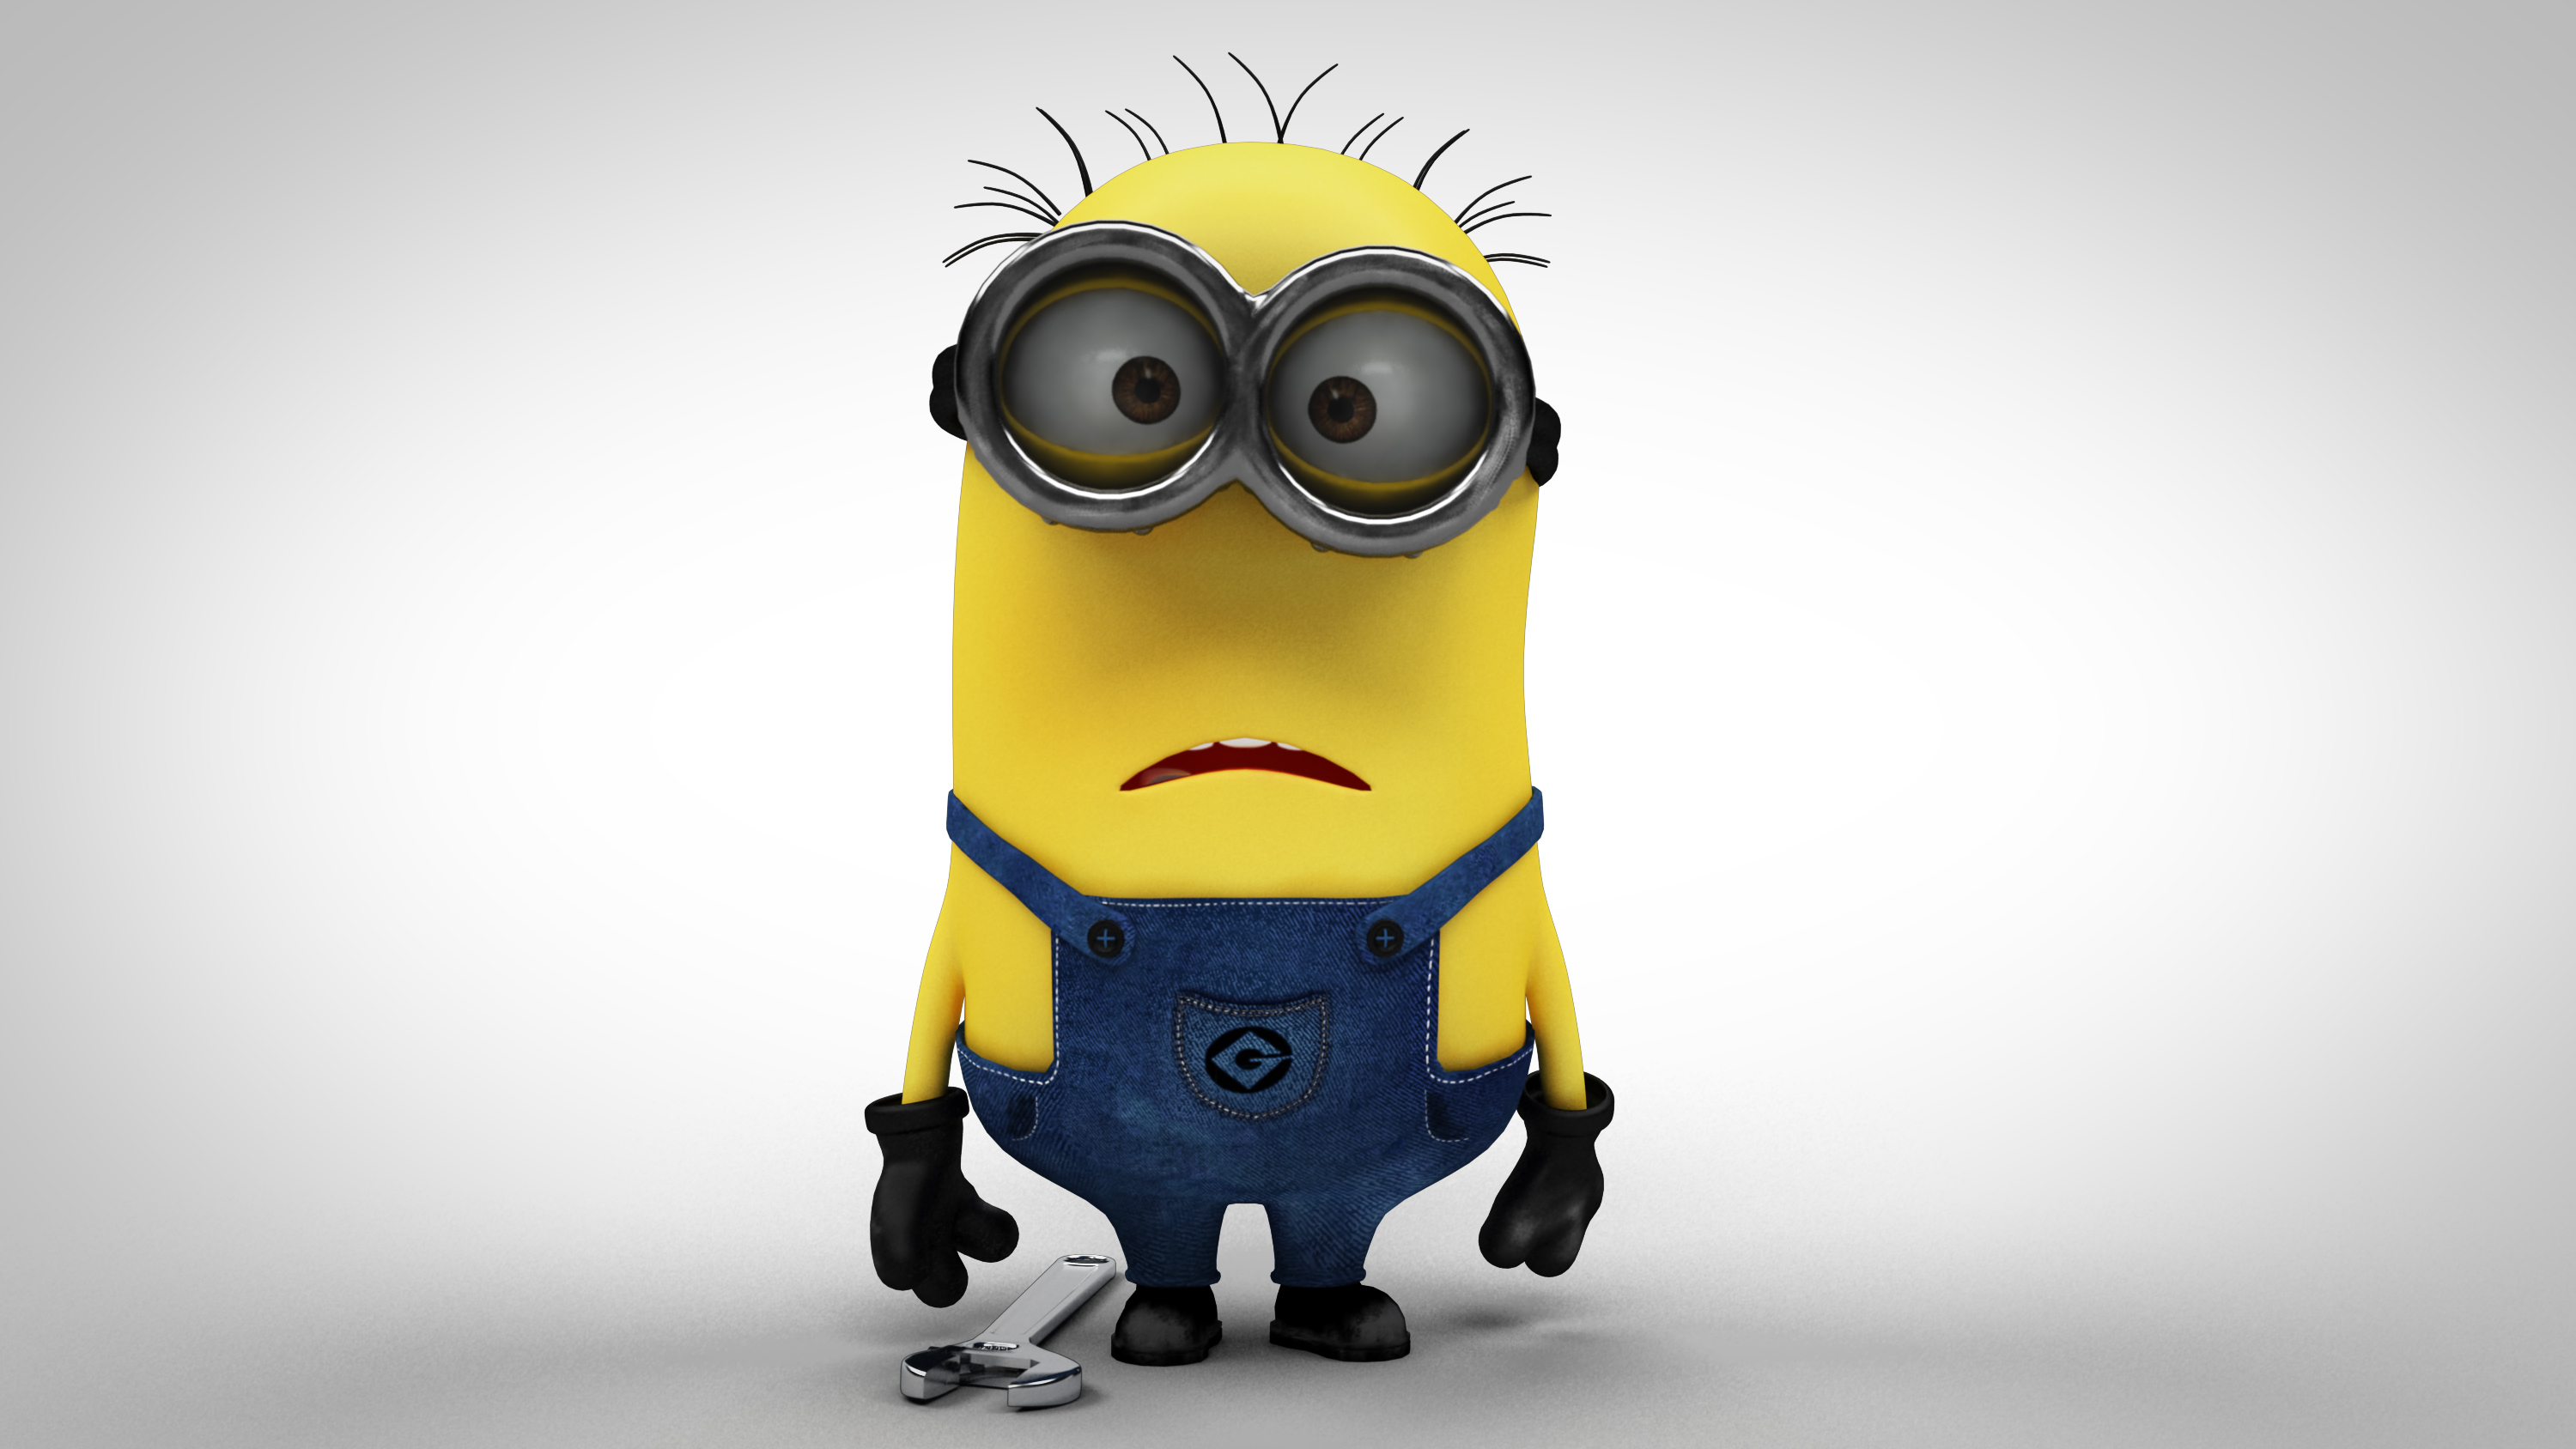 despicable_me_minion_by_rofhiwa-d660nly.jpg